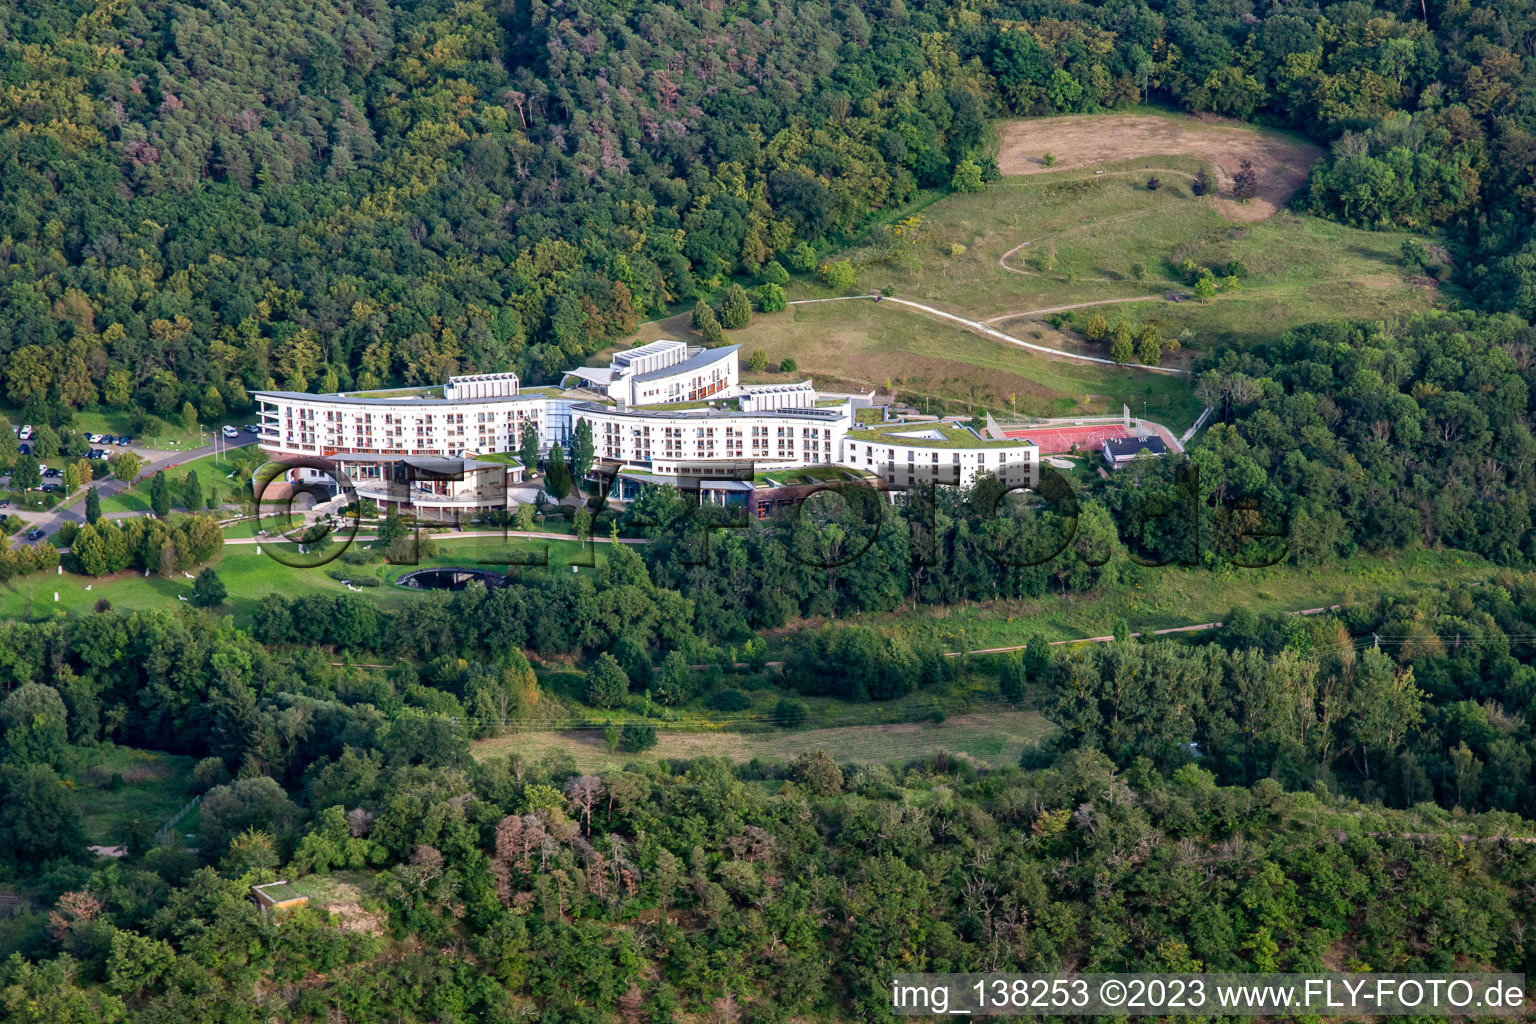 Aerial photograpy of Three Castles Clinic in the district Ebernburg in Bad Kreuznach in the state Rhineland-Palatinate, Germany